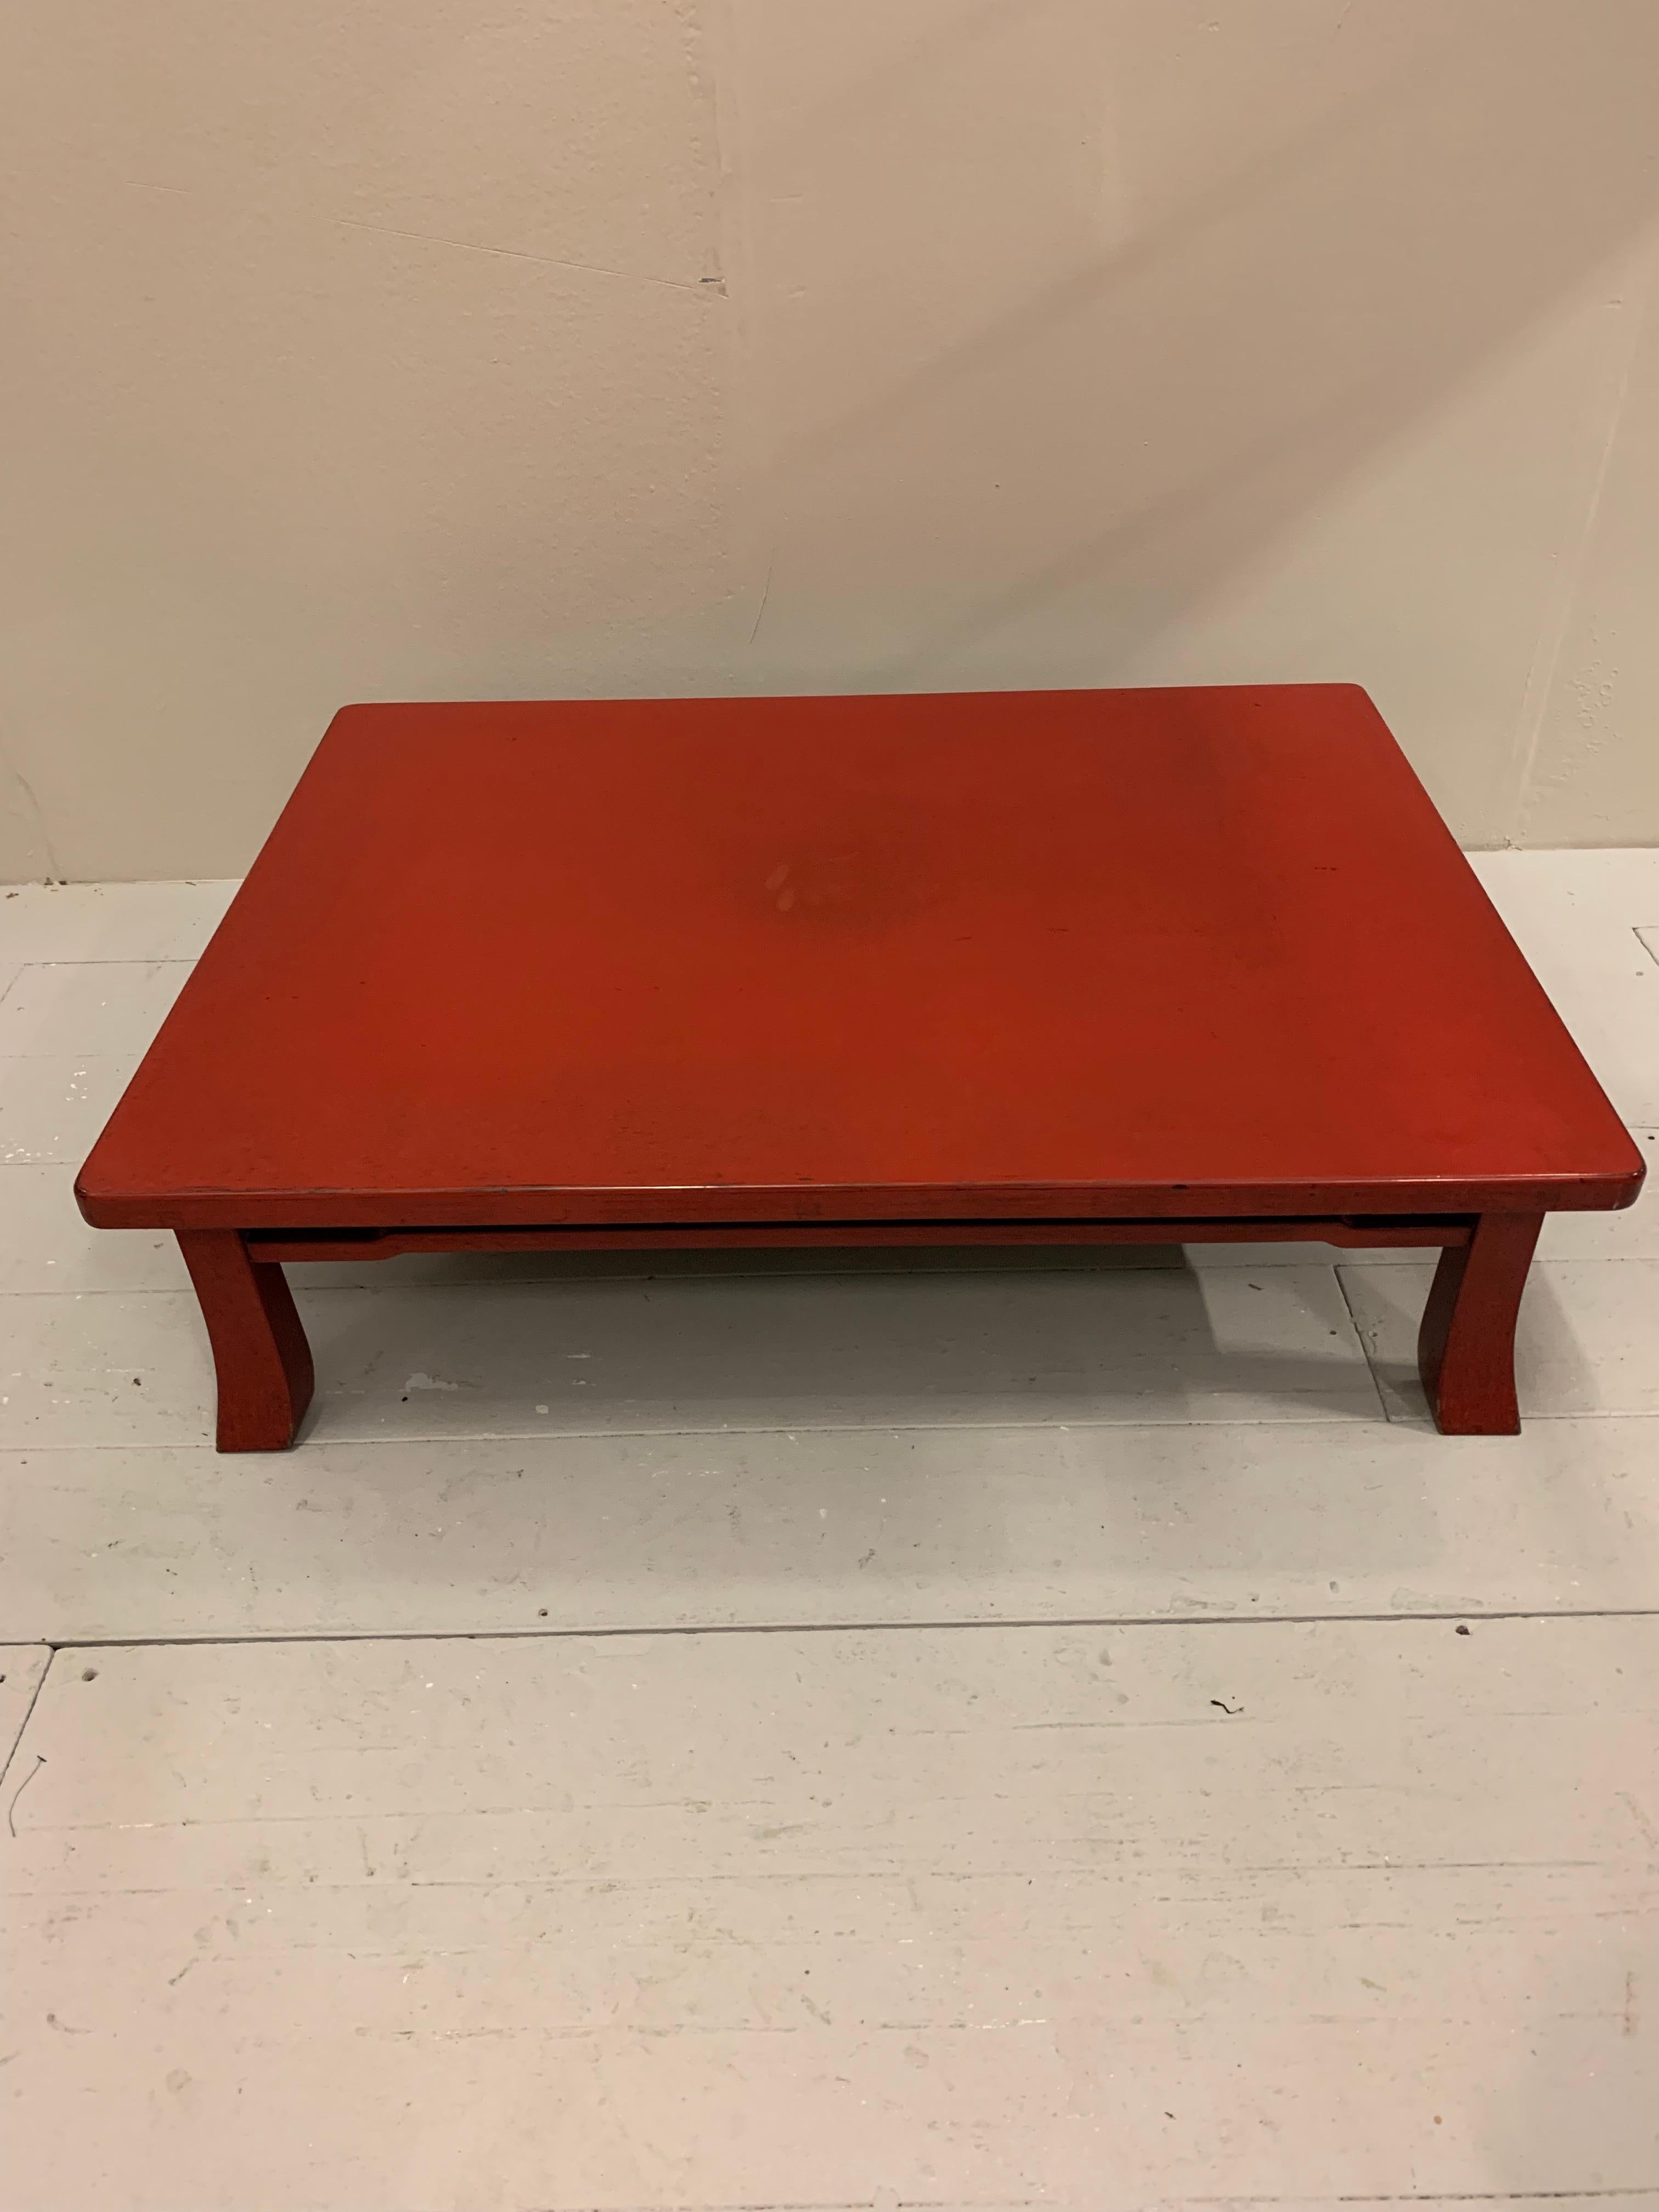 This is a great size and colour red Japanese negora lacquered coffee table.
There are small signs of wear which comes with age and use but overall it is in very good condition.
The deep classically understated oriental design would be a useful